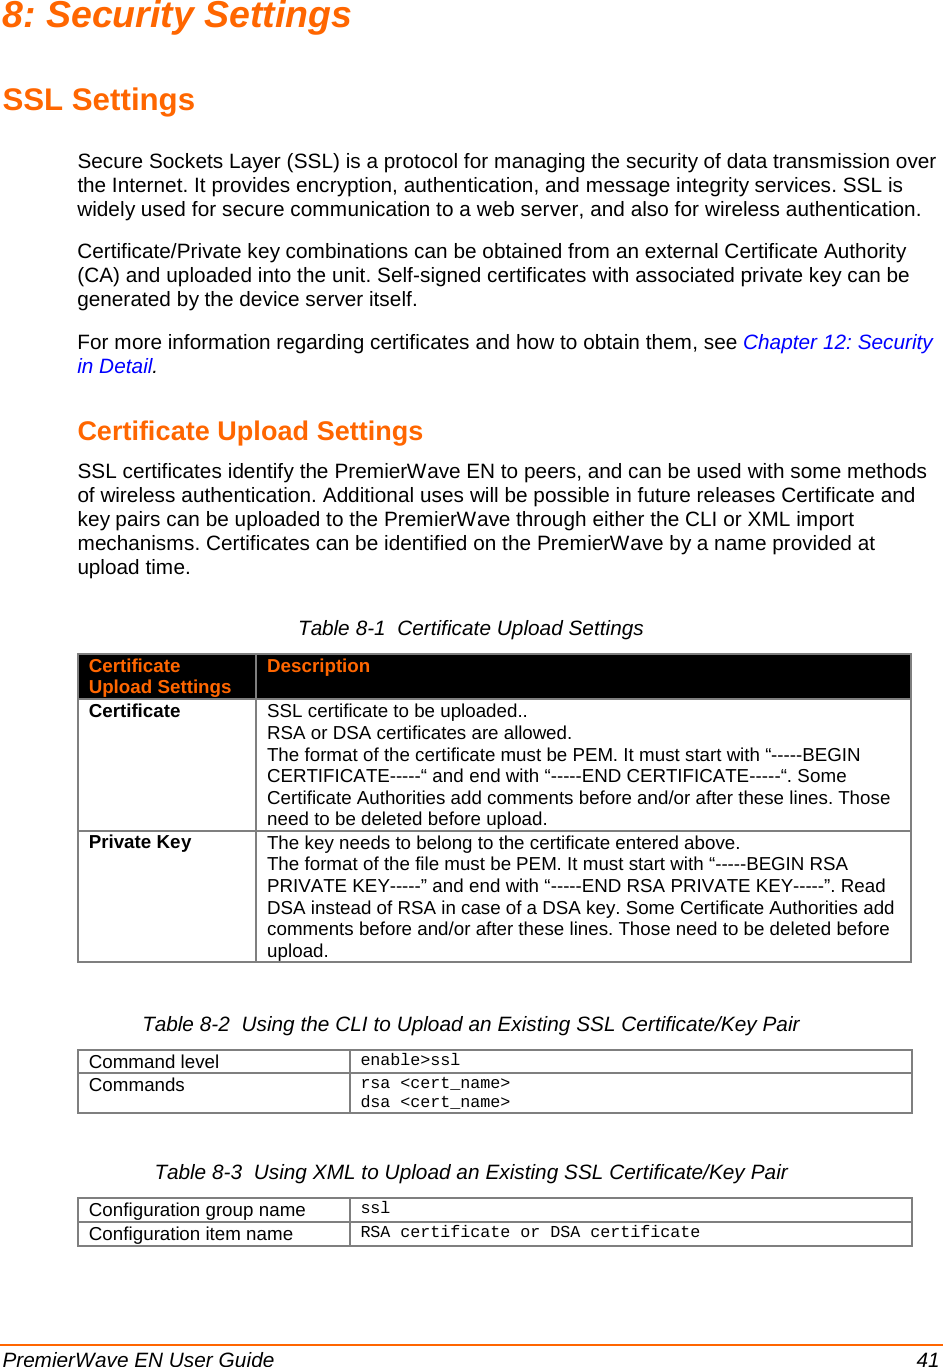  PremierWave EN User Guide    41 8: Security Settings SSL Settings Secure Sockets Layer (SSL) is a protocol for managing the security of data transmission over the Internet. It provides encryption, authentication, and message integrity services. SSL is widely used for secure communication to a web server, and also for wireless authentication. Certificate/Private key combinations can be obtained from an external Certificate Authority (CA) and uploaded into the unit. Self-signed certificates with associated private key can be generated by the device server itself. For more information regarding certificates and how to obtain them, see Chapter 12: Security in Detail. Certificate Upload Settings SSL certificates identify the PremierWave EN to peers, and can be used with some methods of wireless authentication. Additional uses will be possible in future releases Certificate and key pairs can be uploaded to the PremierWave through either the CLI or XML import mechanisms. Certificates can be identified on the PremierWave by a name provided at upload time. Table 8-1  Certificate Upload Settings Certificate Upload Settings Description Certificate SSL certificate to be uploaded.. RSA or DSA certificates are allowed. The format of the certificate must be PEM. It must start with “-----BEGIN CERTIFICATE-----“ and end with “-----END CERTIFICATE-----“. Some Certificate Authorities add comments before and/or after these lines. Those need to be deleted before upload. Private Key The key needs to belong to the certificate entered above. The format of the file must be PEM. It must start with “-----BEGIN RSA PRIVATE KEY-----” and end with “-----END RSA PRIVATE KEY-----”. Read DSA instead of RSA in case of a DSA key. Some Certificate Authorities add comments before and/or after these lines. Those need to be deleted before upload.  Table 8-2  Using the CLI to Upload an Existing SSL Certificate/Key Pair Command level enable&gt;ssl Commands rsa &lt;cert_name&gt;  dsa &lt;cert_name&gt;    Table 8-3  Using XML to Upload an Existing SSL Certificate/Key Pair Configuration group name ssl Configuration item name RSA certificate or DSA certificate 